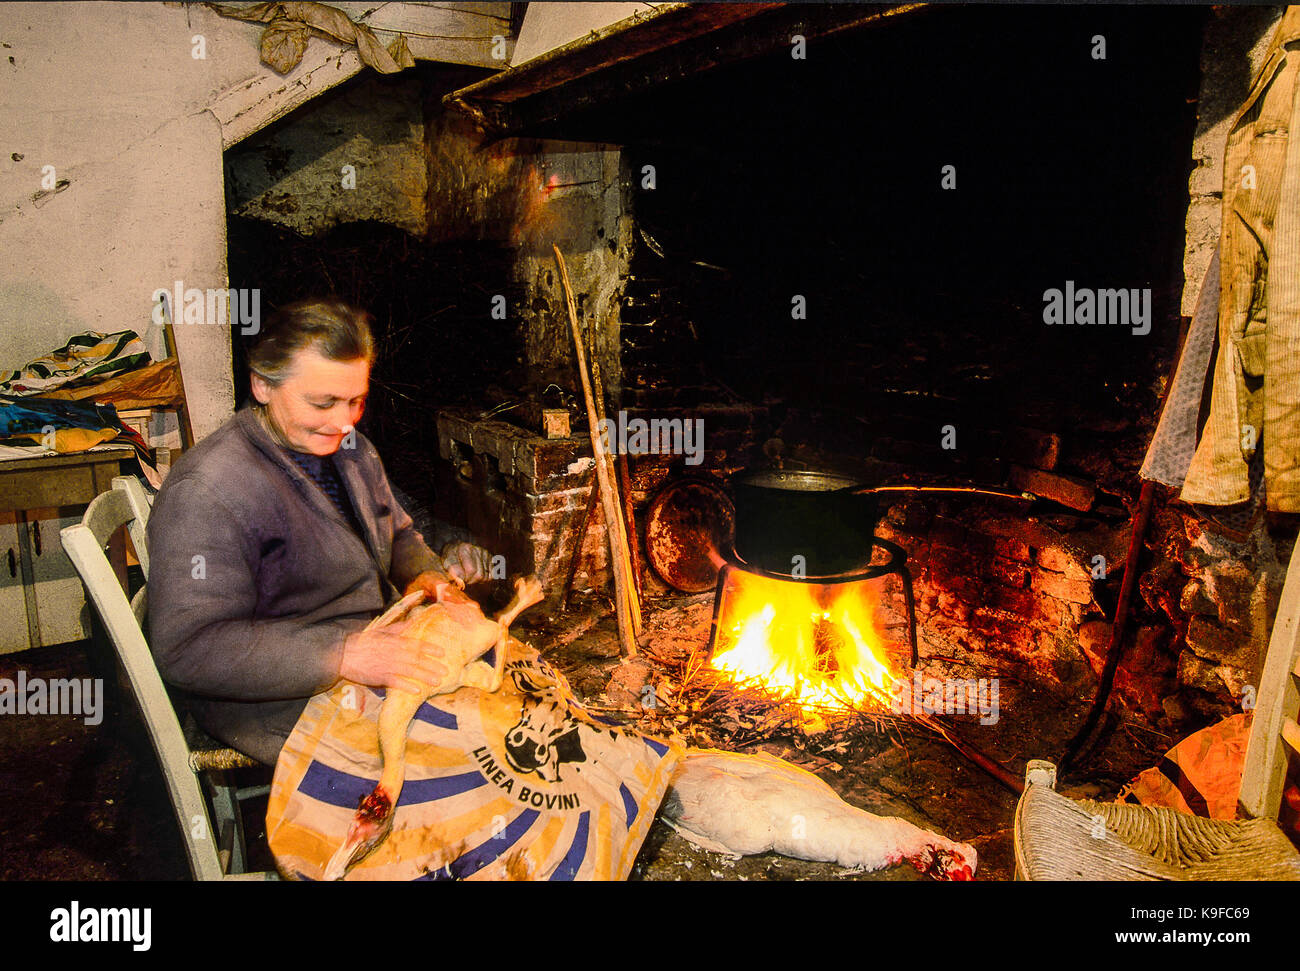 Italy Marche Valle Dell'Aso ancient colonic house -woman he plucked chicken Stock Photo